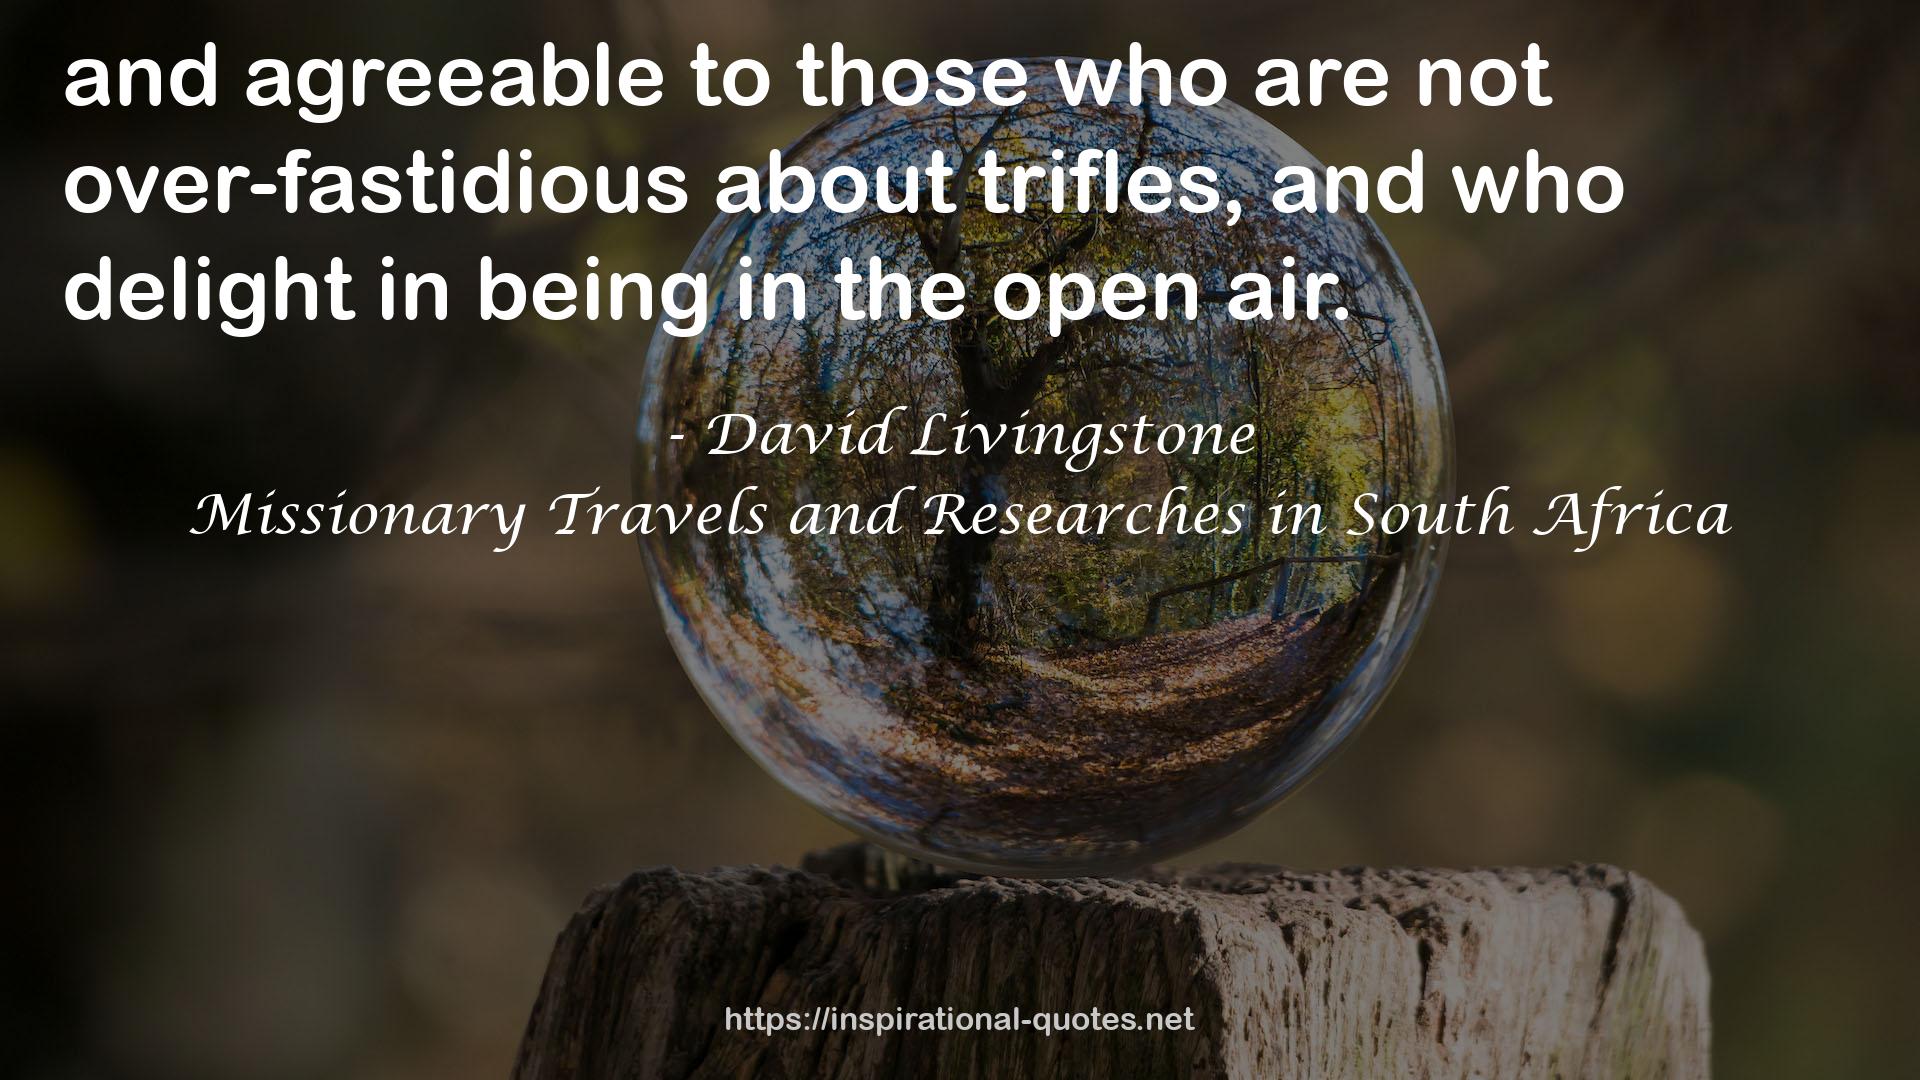 Missionary Travels and Researches in South Africa QUOTES